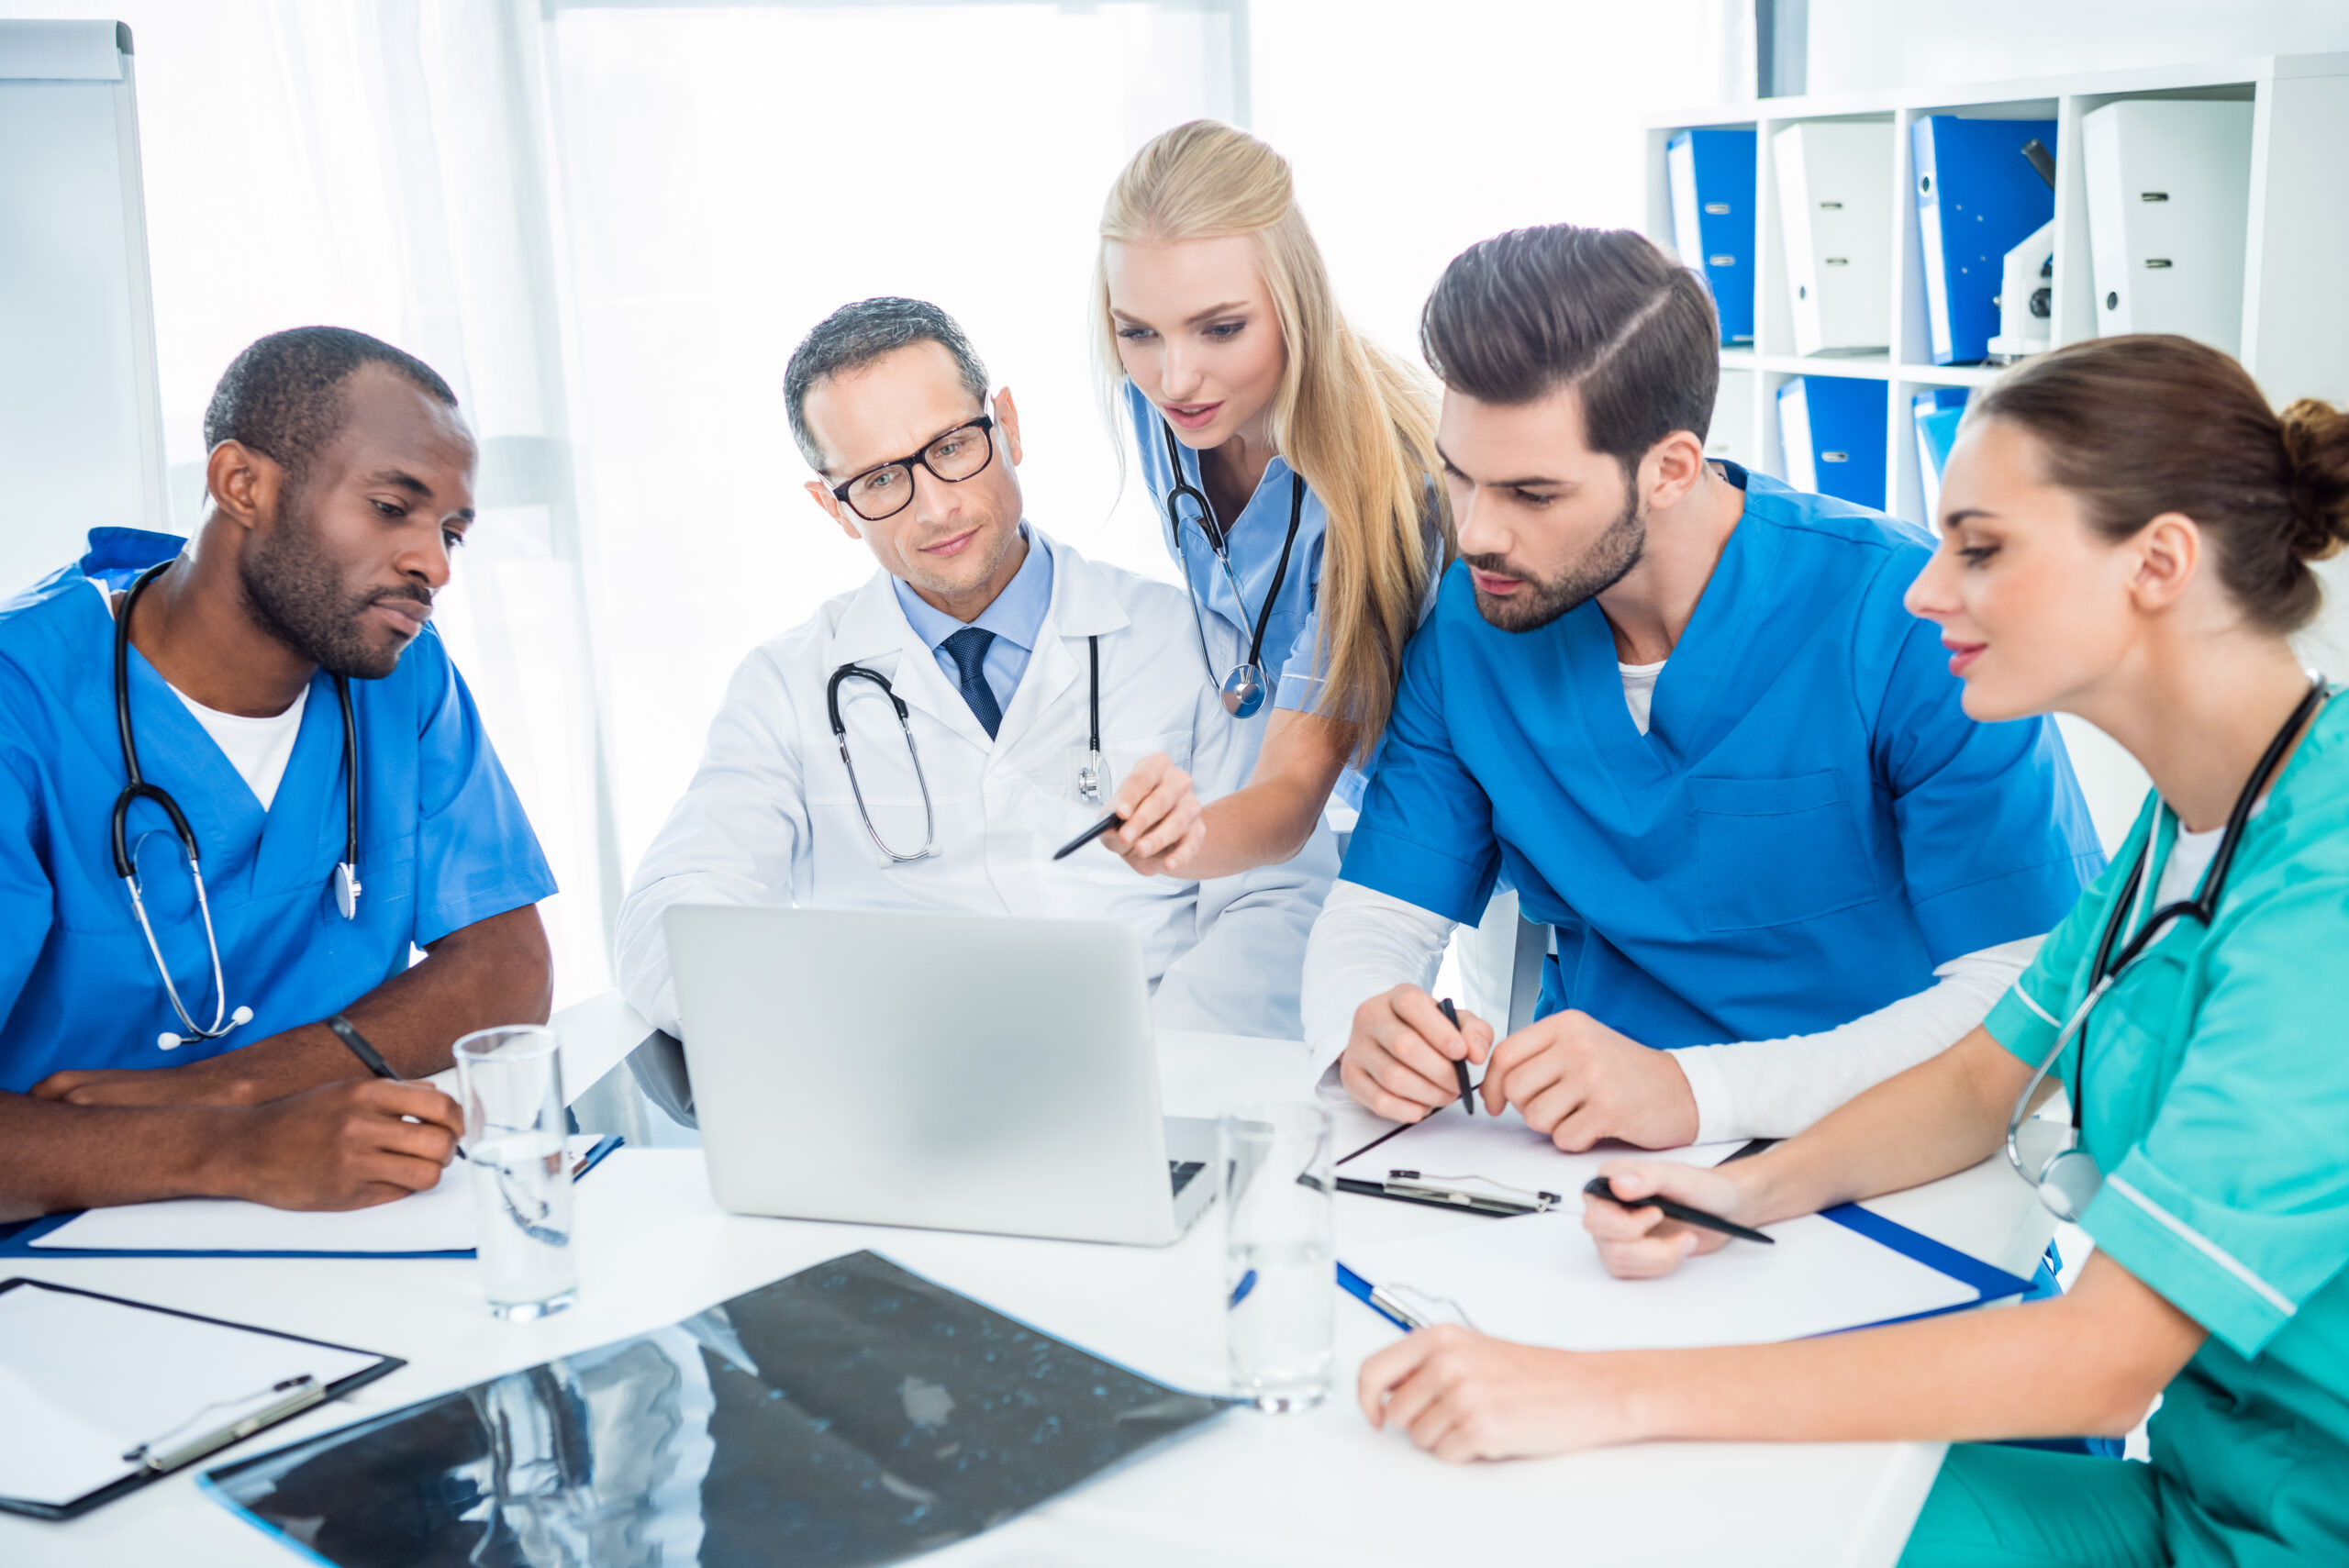 Physicians and clinicians are engaged in the examination and analysis of the patient's diagnosis